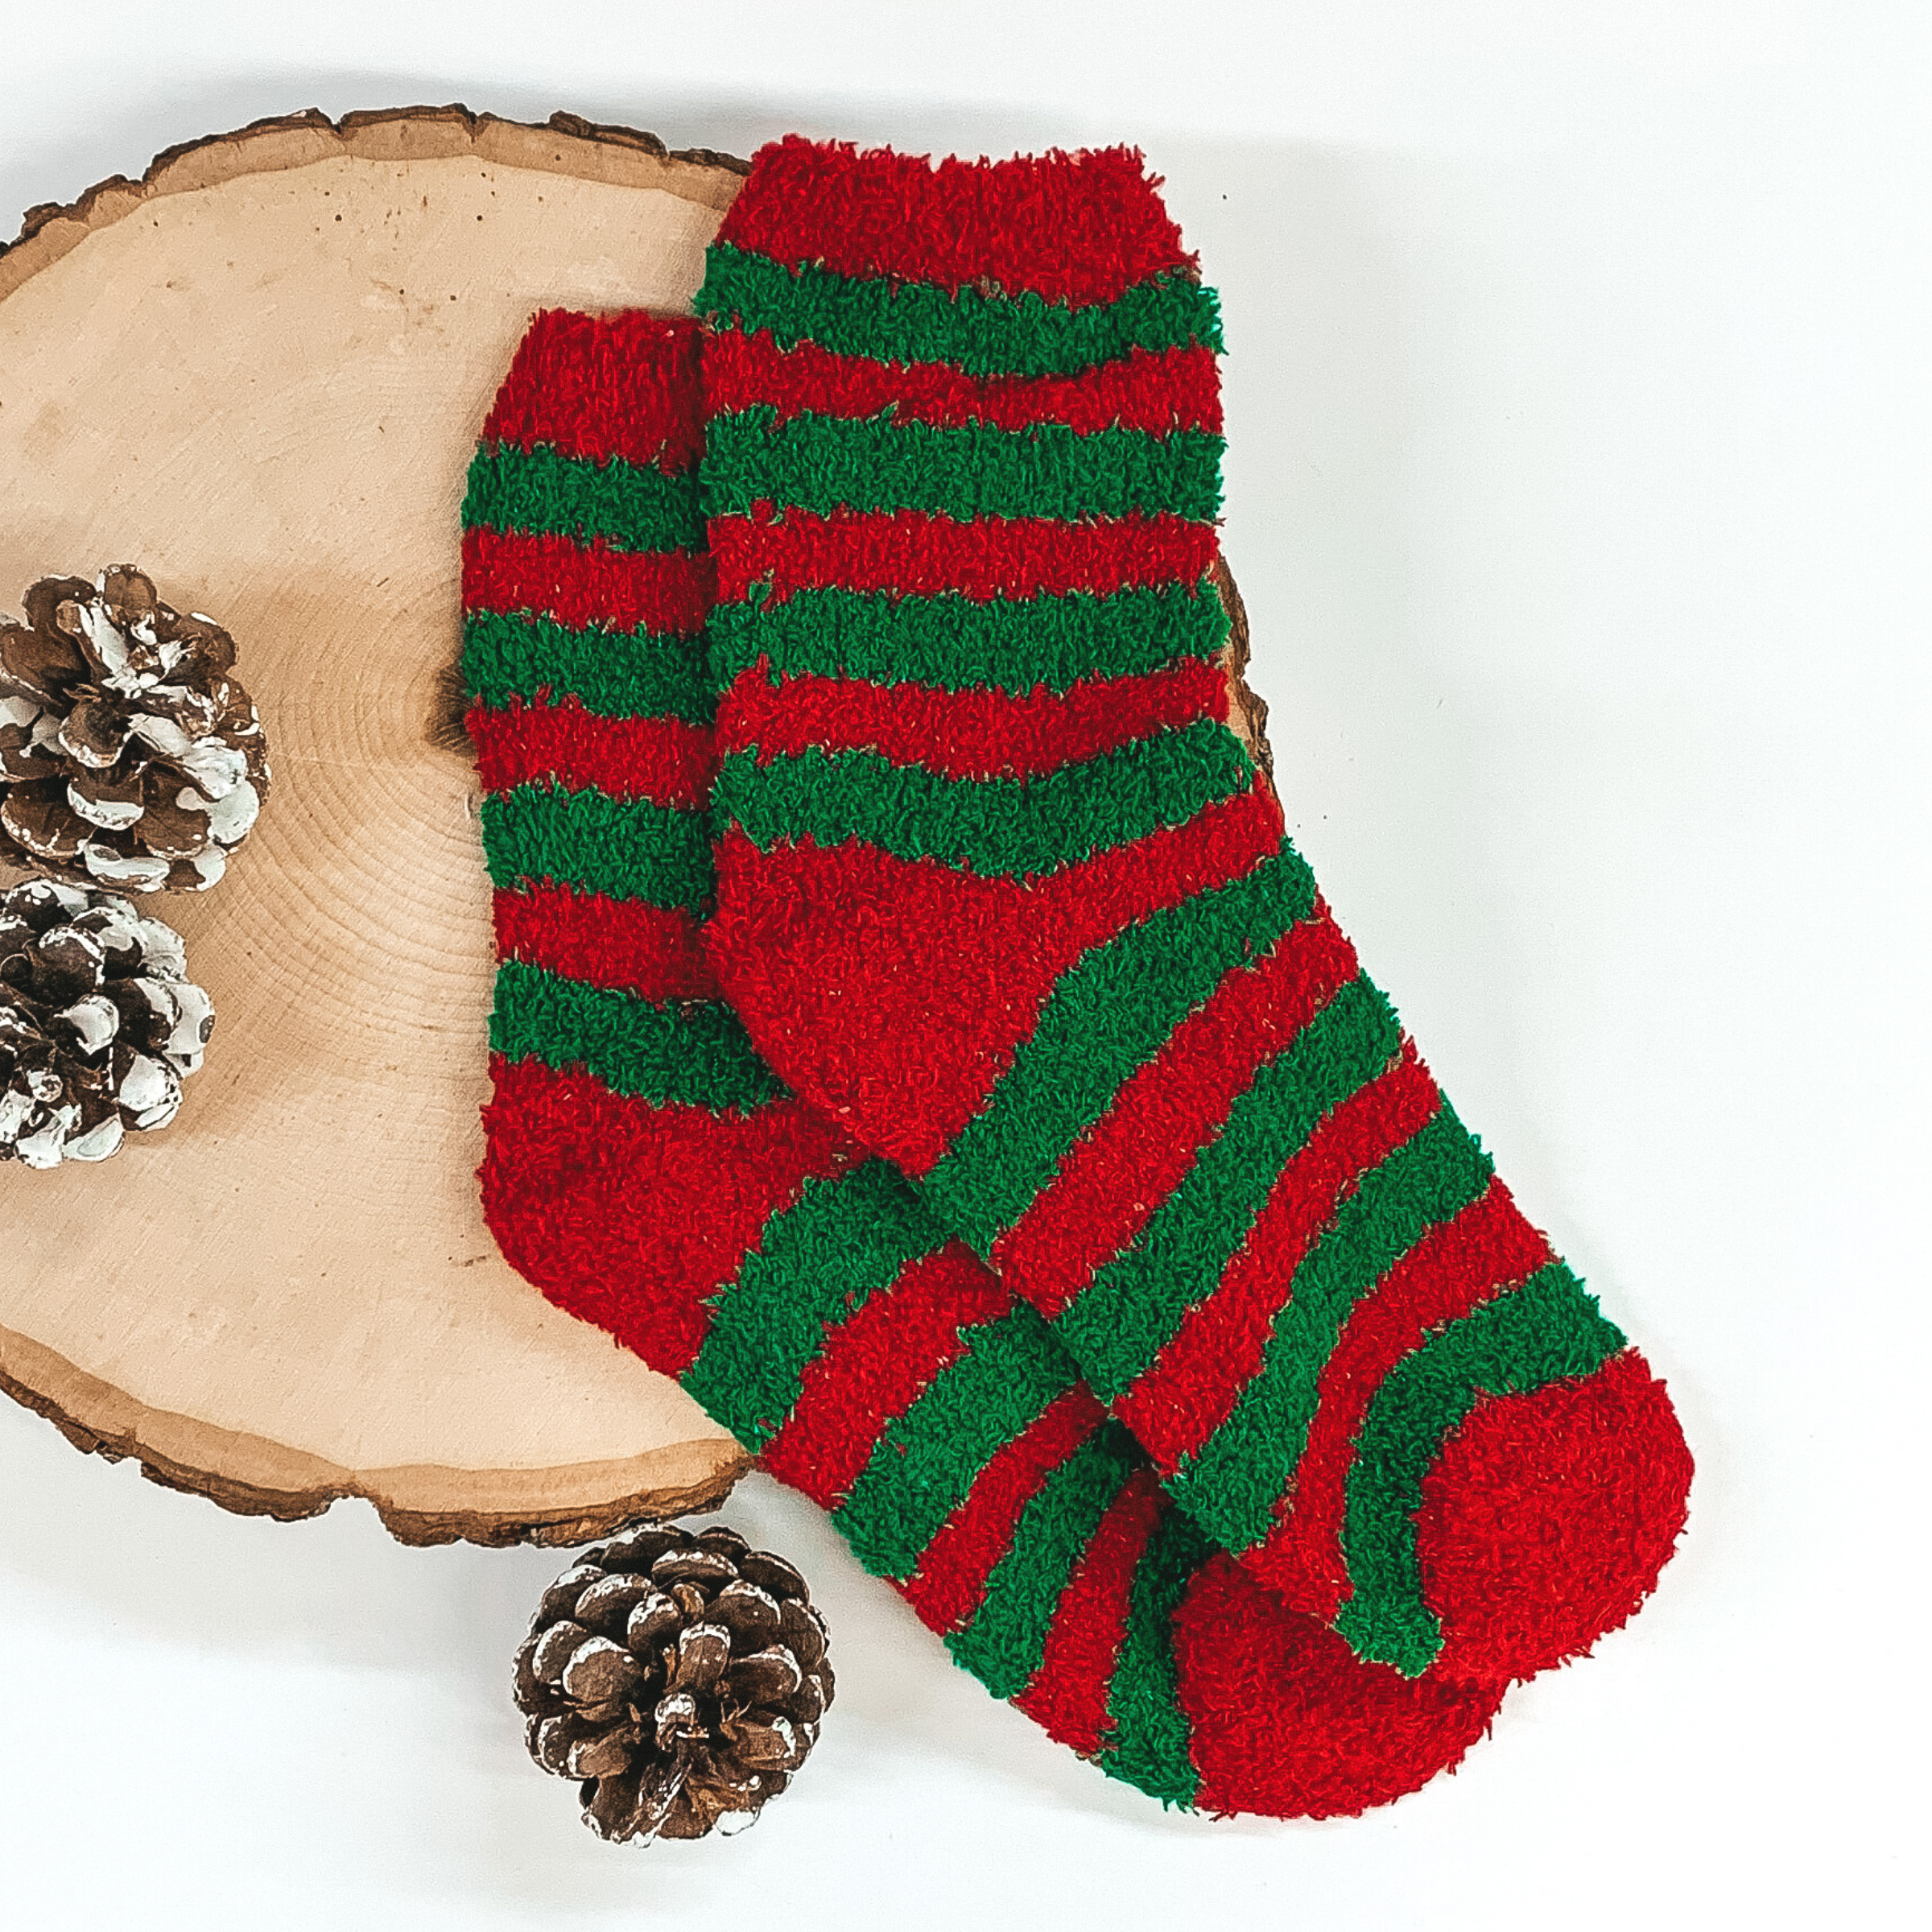 Fuzzy red and green striped socks. These socks are pictured laying on a piece of wood that is on a white background.